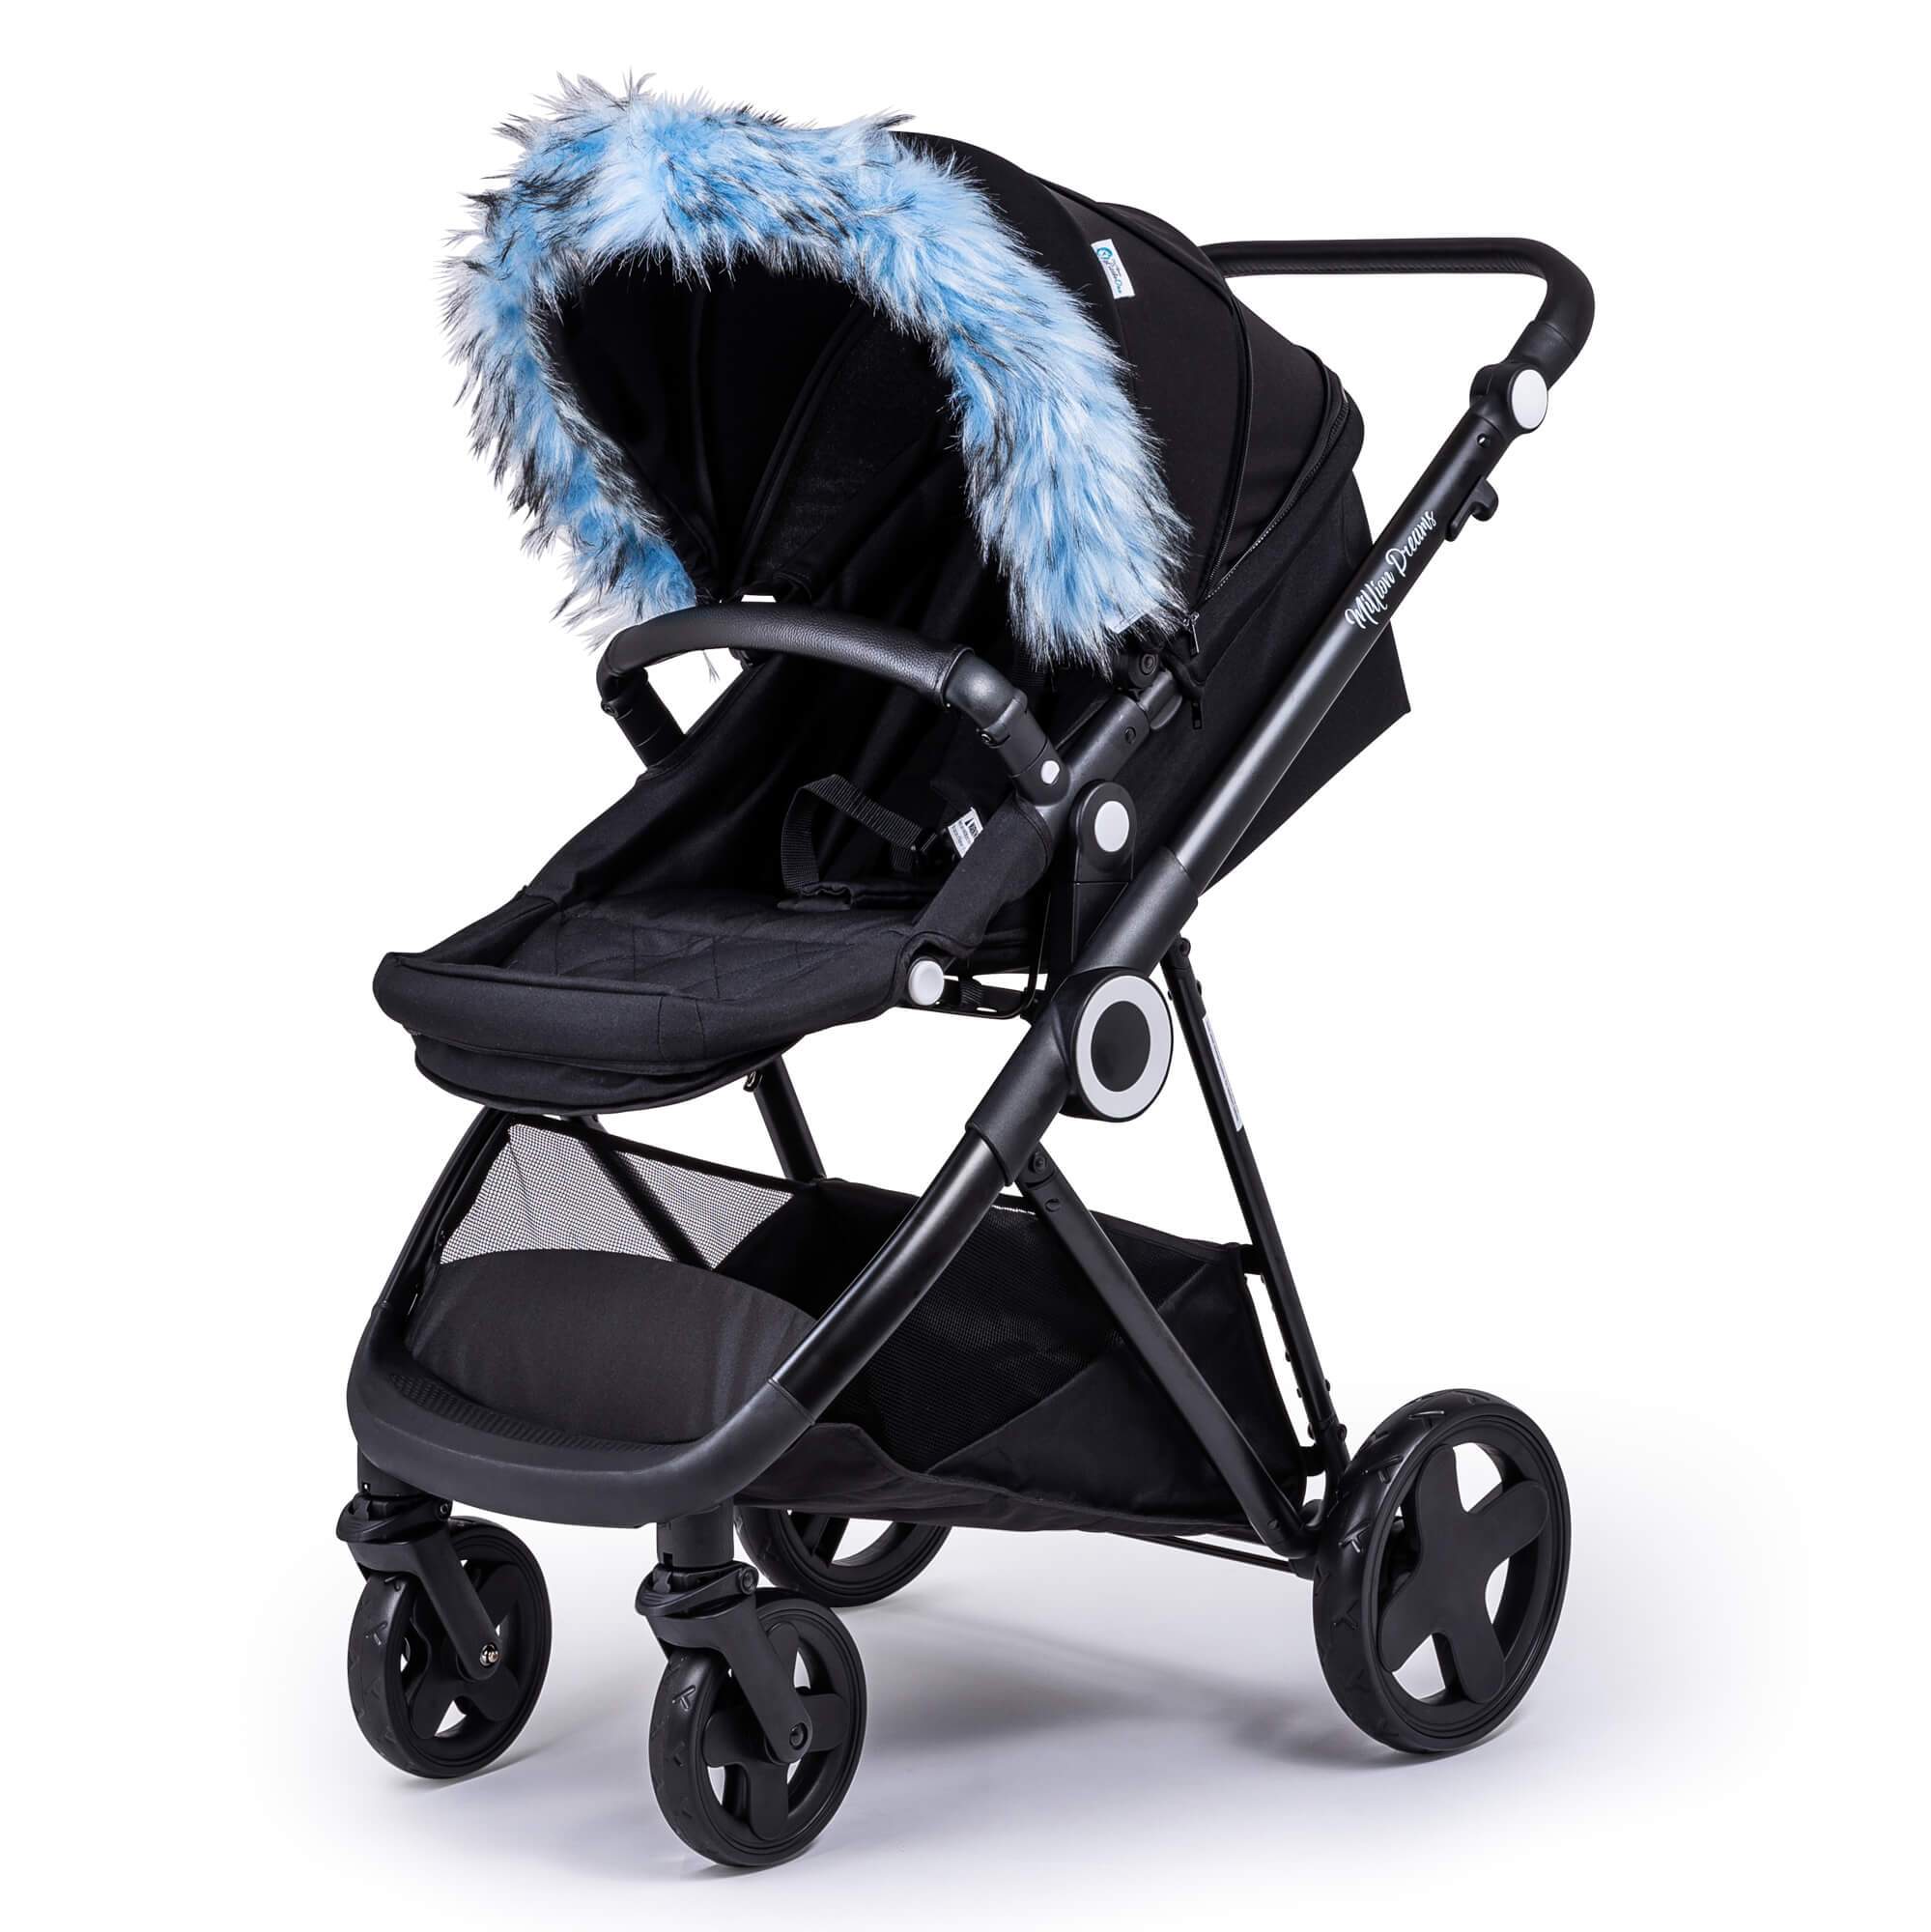 Pram Fur Hood Trim Attachment for Pushchair Compatible with Phil & Teds - Light Blue / Fits All Models | For Your Little One